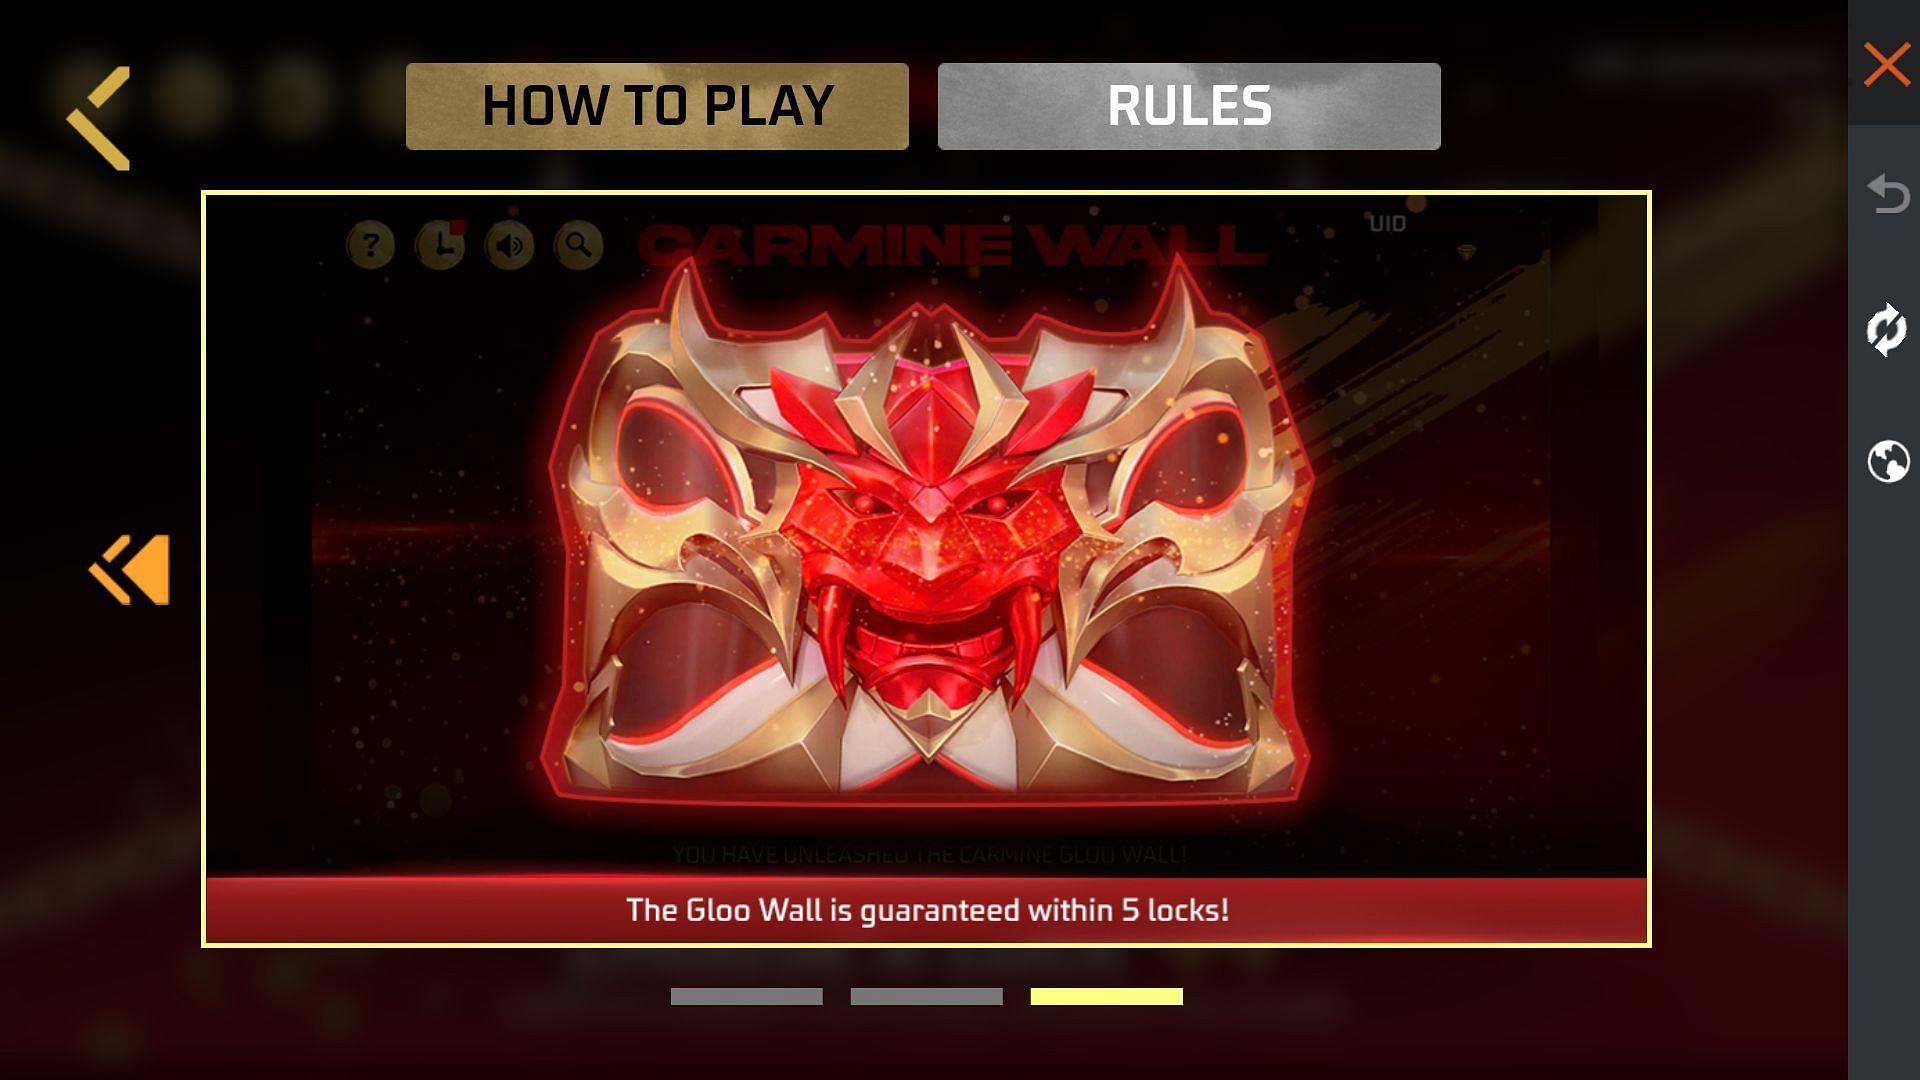 New Carmine Wall event has made its way into the battle royale title (Image via Garena)